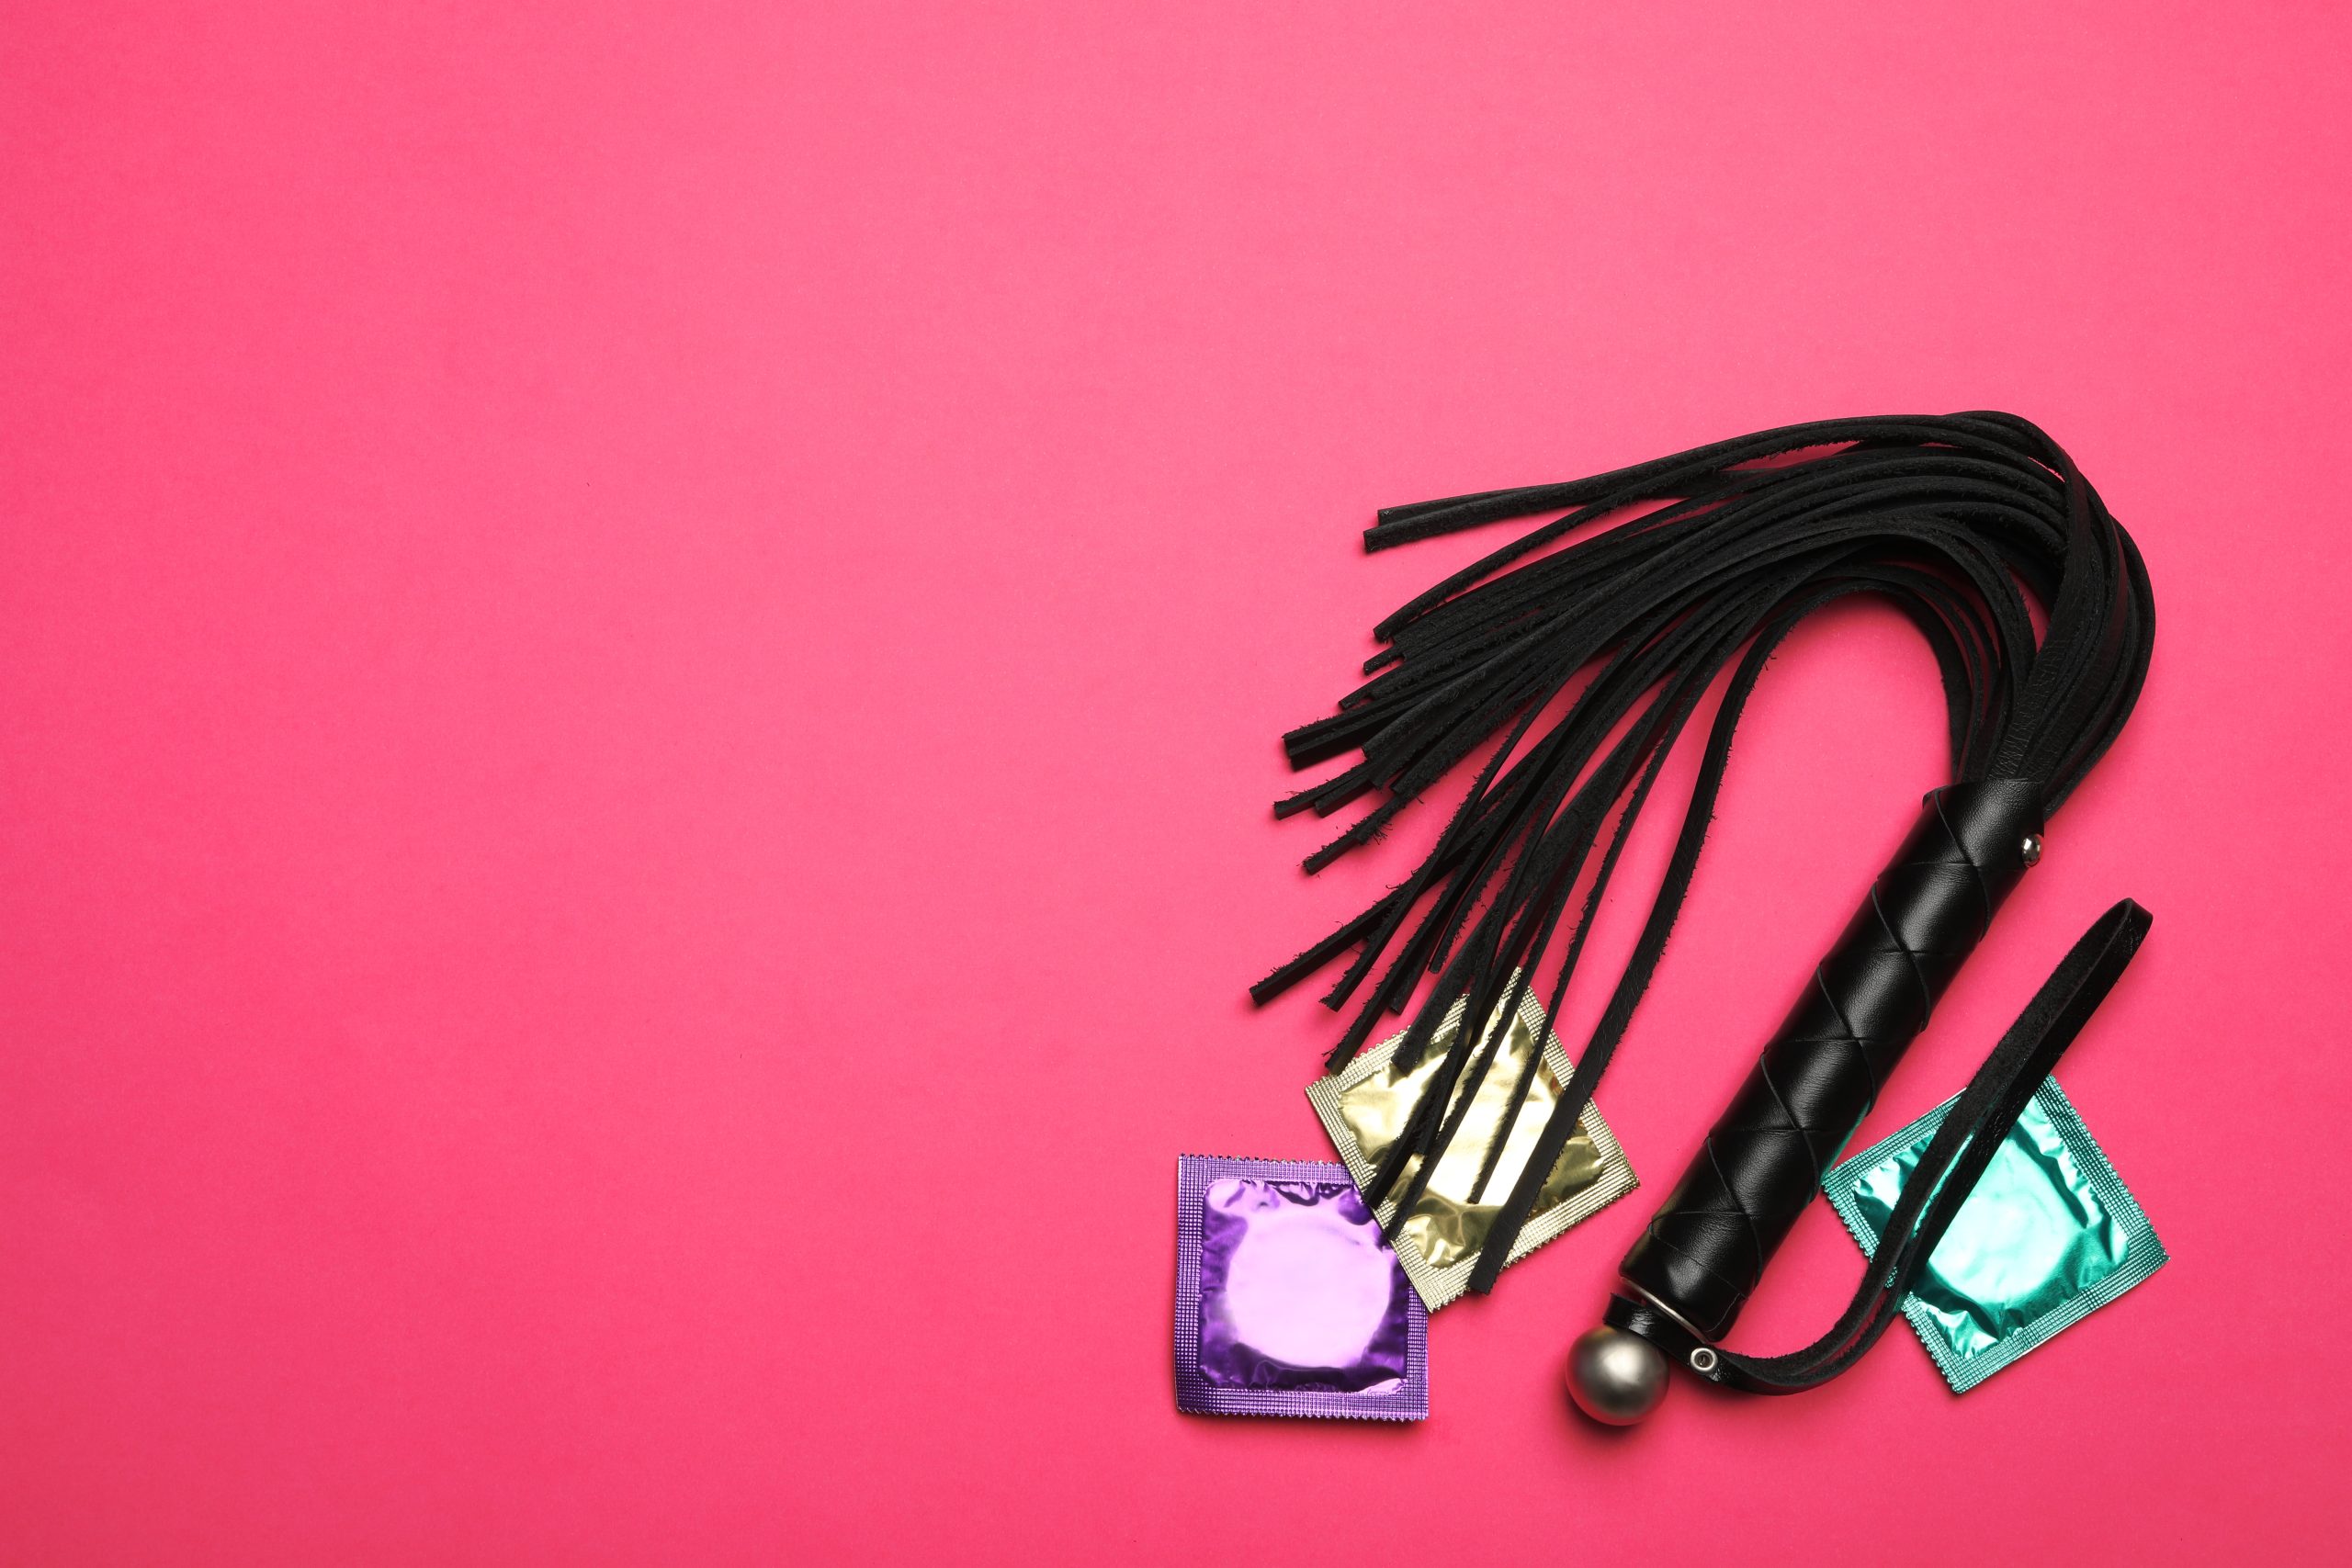 Whip and condoms on pink background, top view with space for text. Sex game